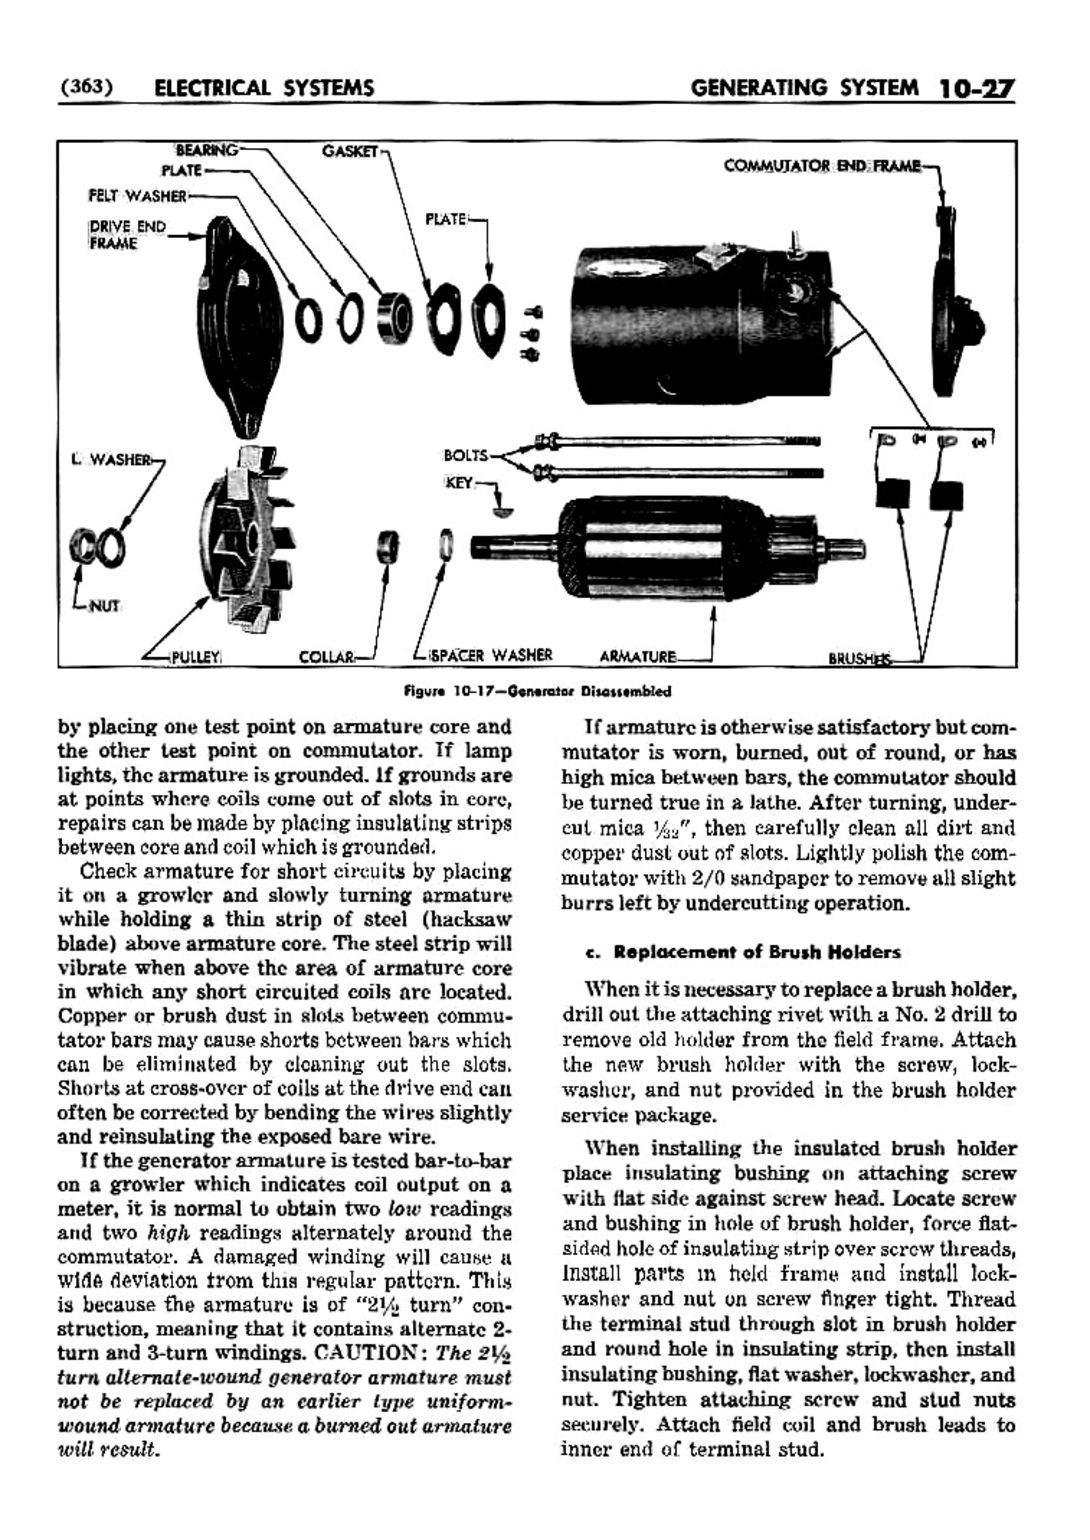 n_11 1952 Buick Shop Manual - Electrical Systems-027-027.jpg